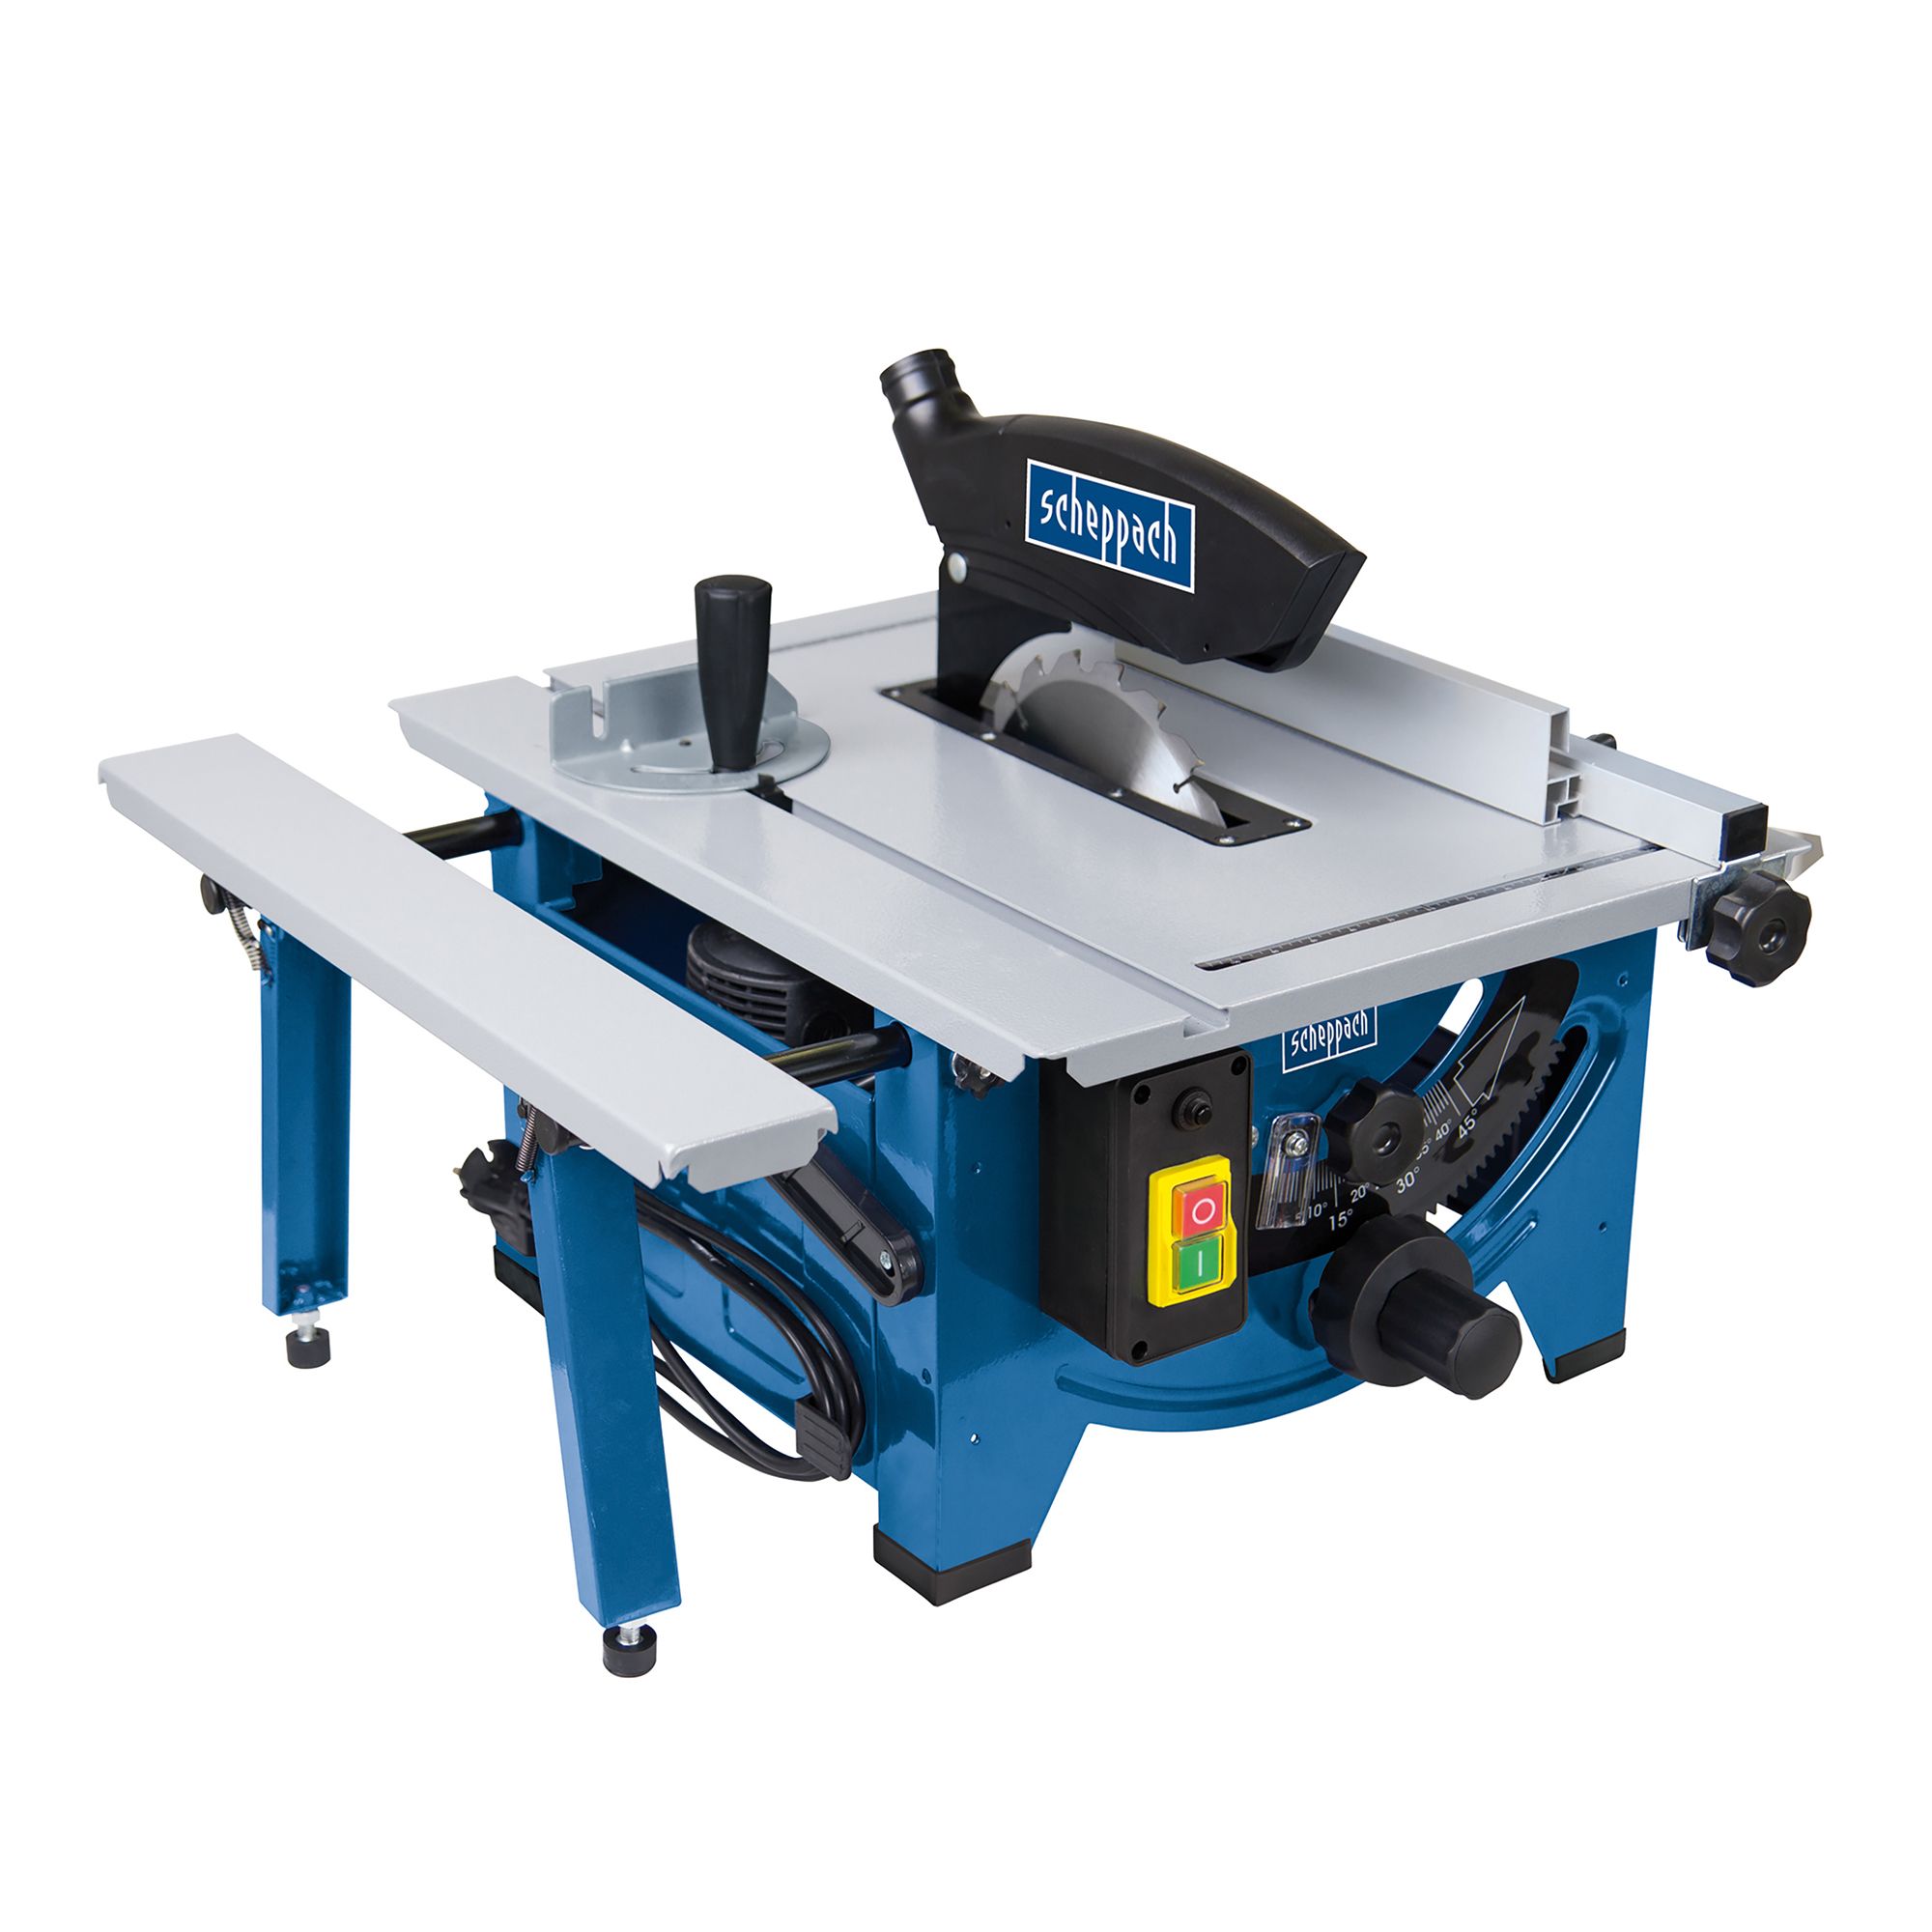 Scheppach 1200W 240V 210mm Corded Table Saw Hs80